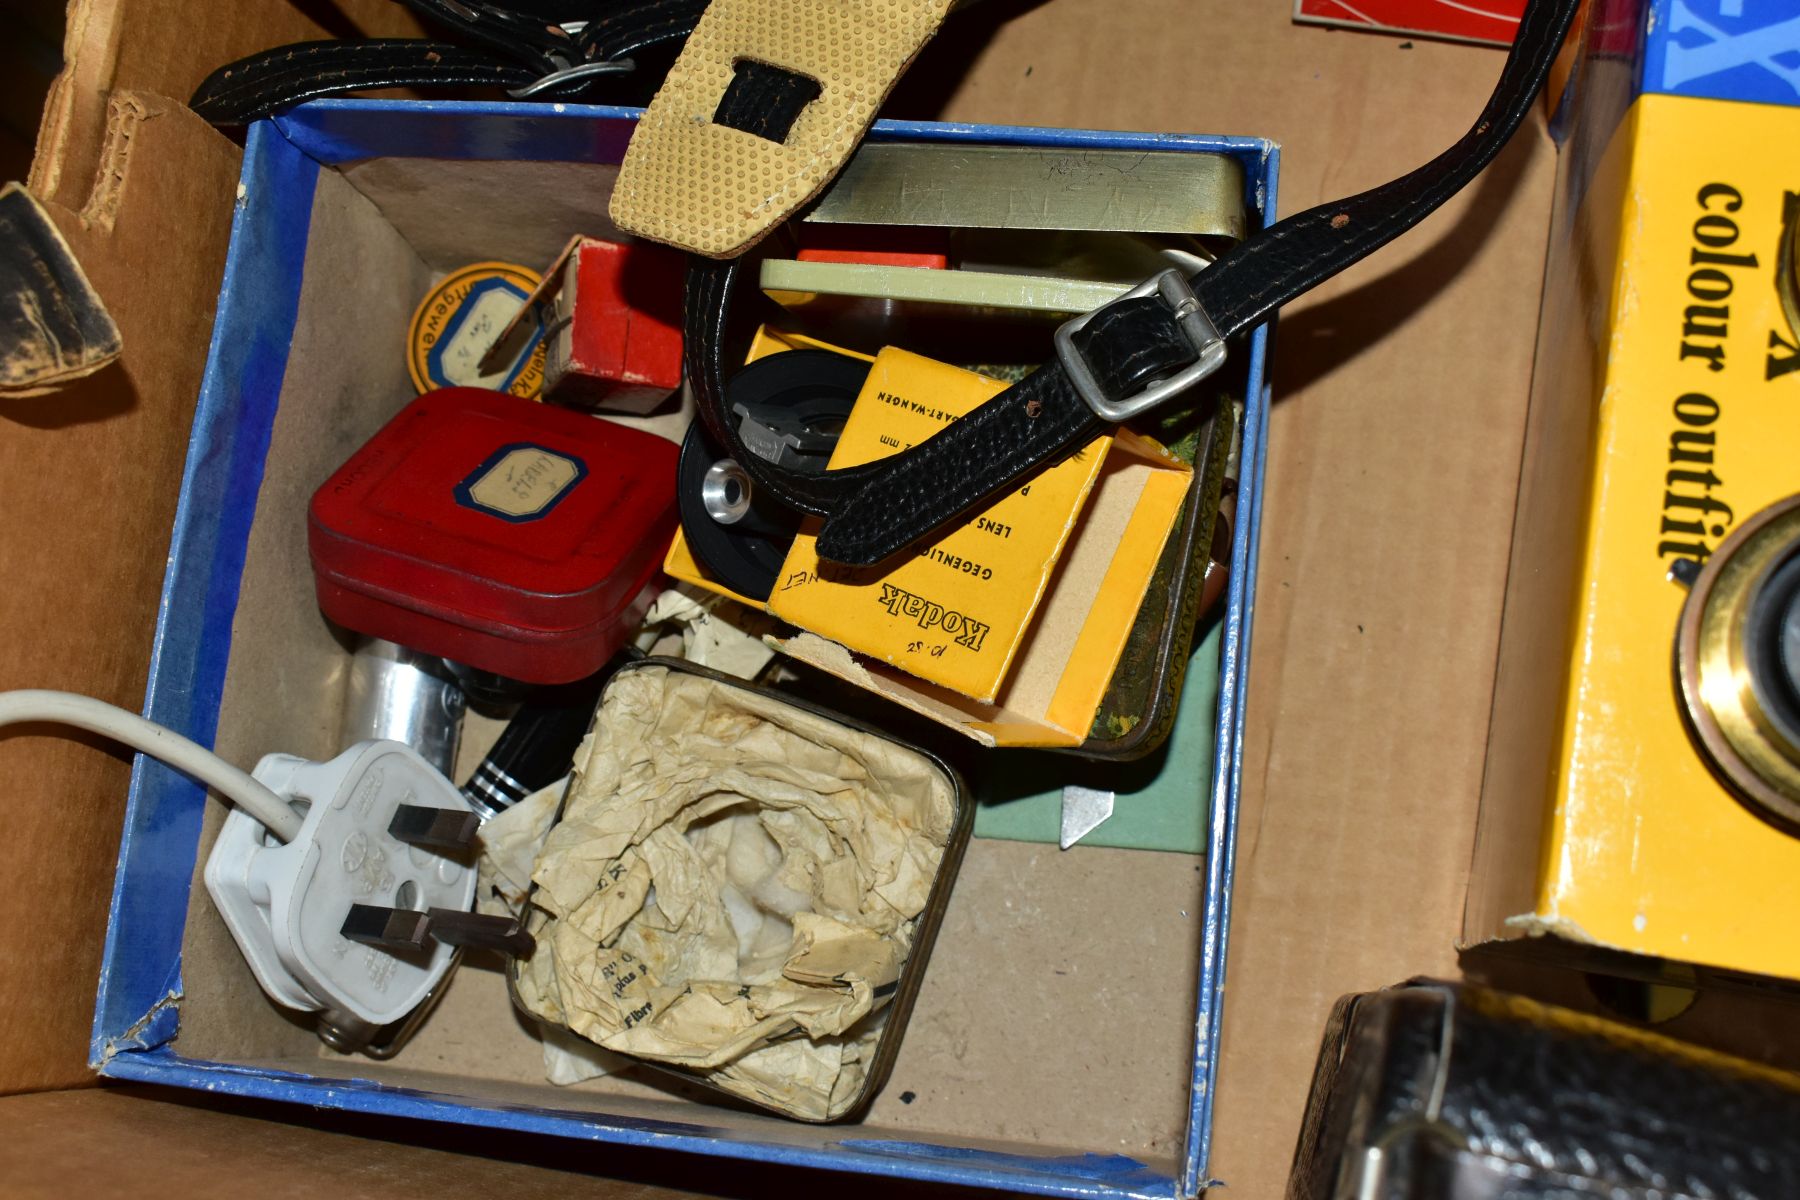 A GROUP OF RADIO'S, TYPEWRITERS, CAMERAS, ETC, including a Roberts R404 radio with envelope of - Image 12 of 14